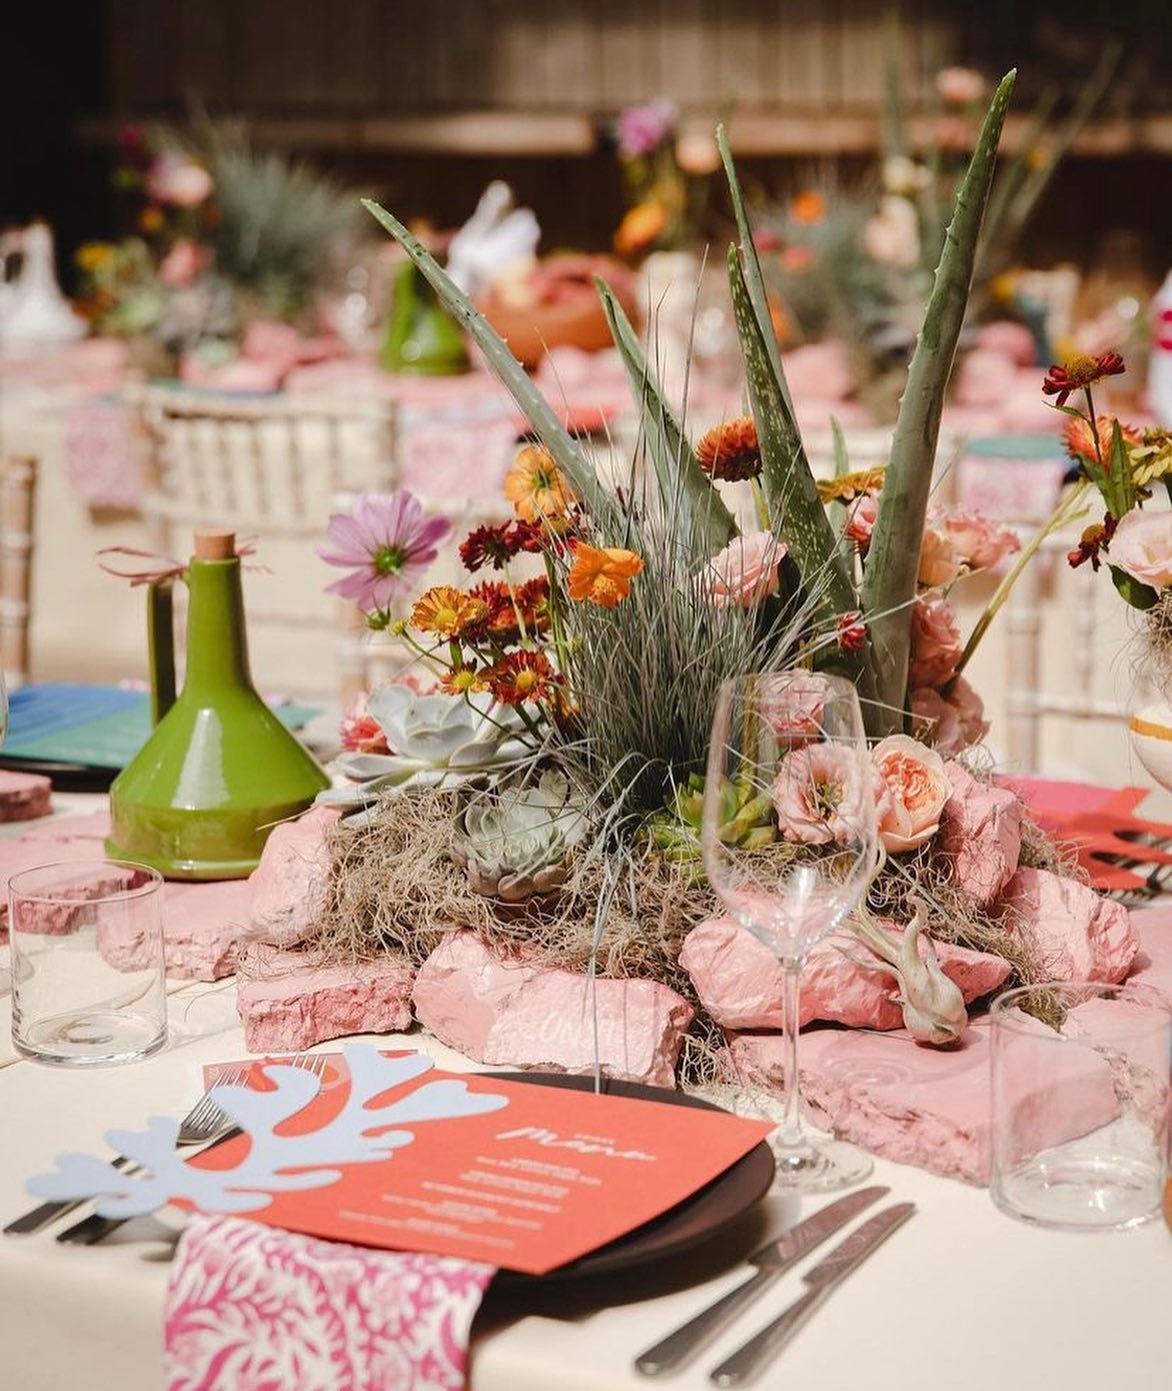 Yesterday the fabulous @studioessy reminded us of this gorgeous event we flowered for @heaps_stacks for Very UK at the @themandrakehotel. We are so lucky to work with such incredible clients who always give us the most beautiful creative briefs. This